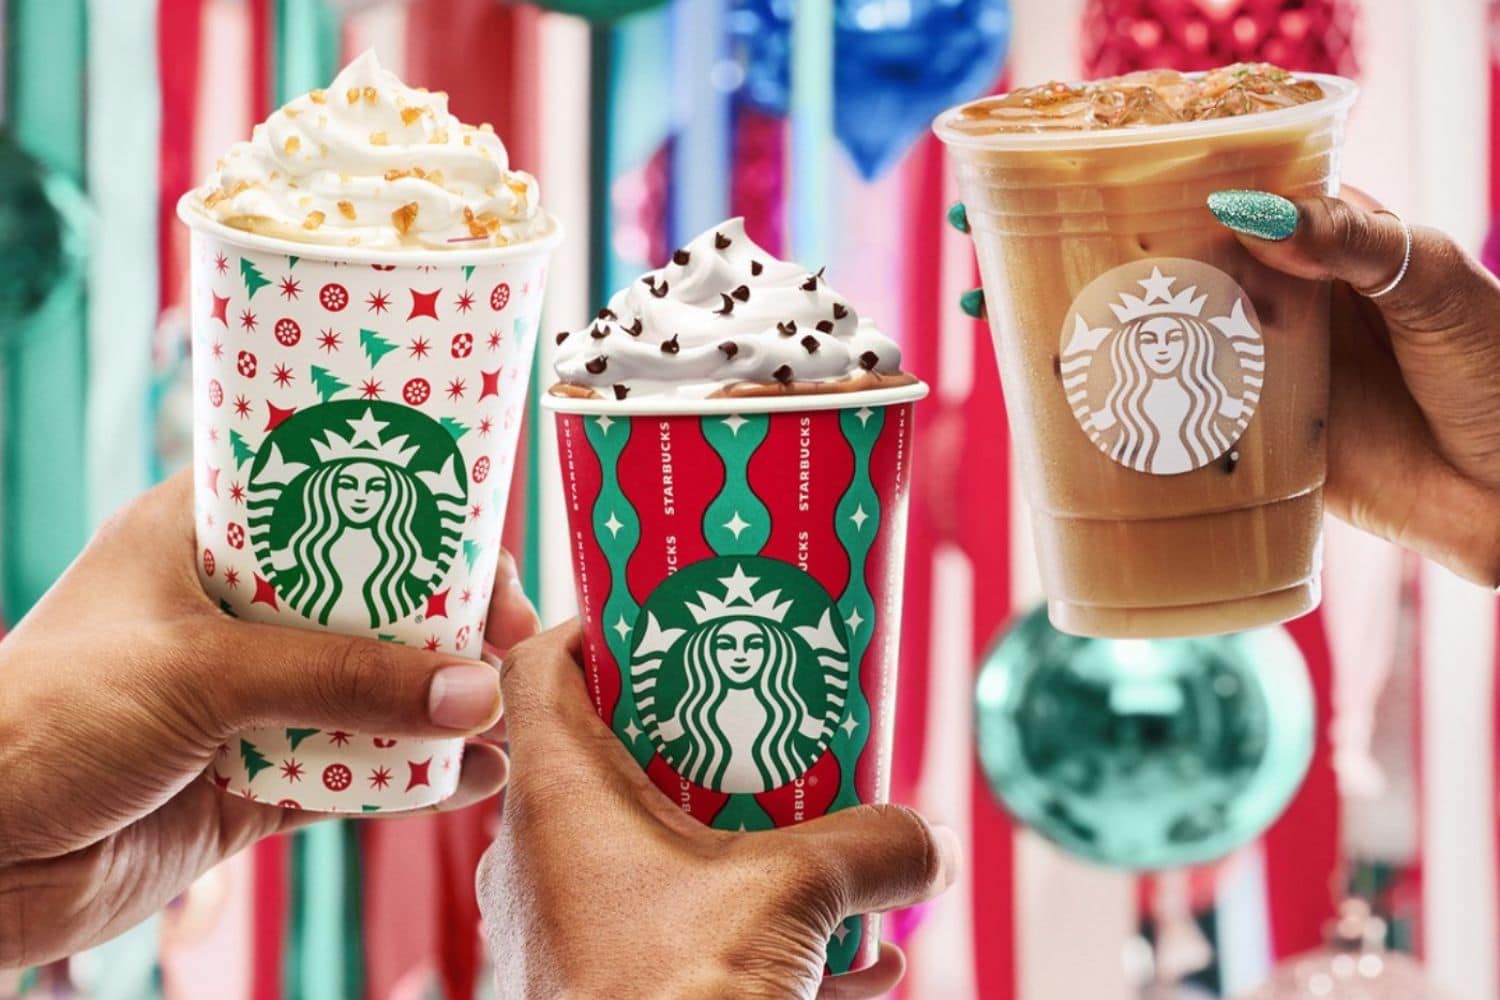 Every 2022 Starbucks Holiday Item, Ranked Worst To Best